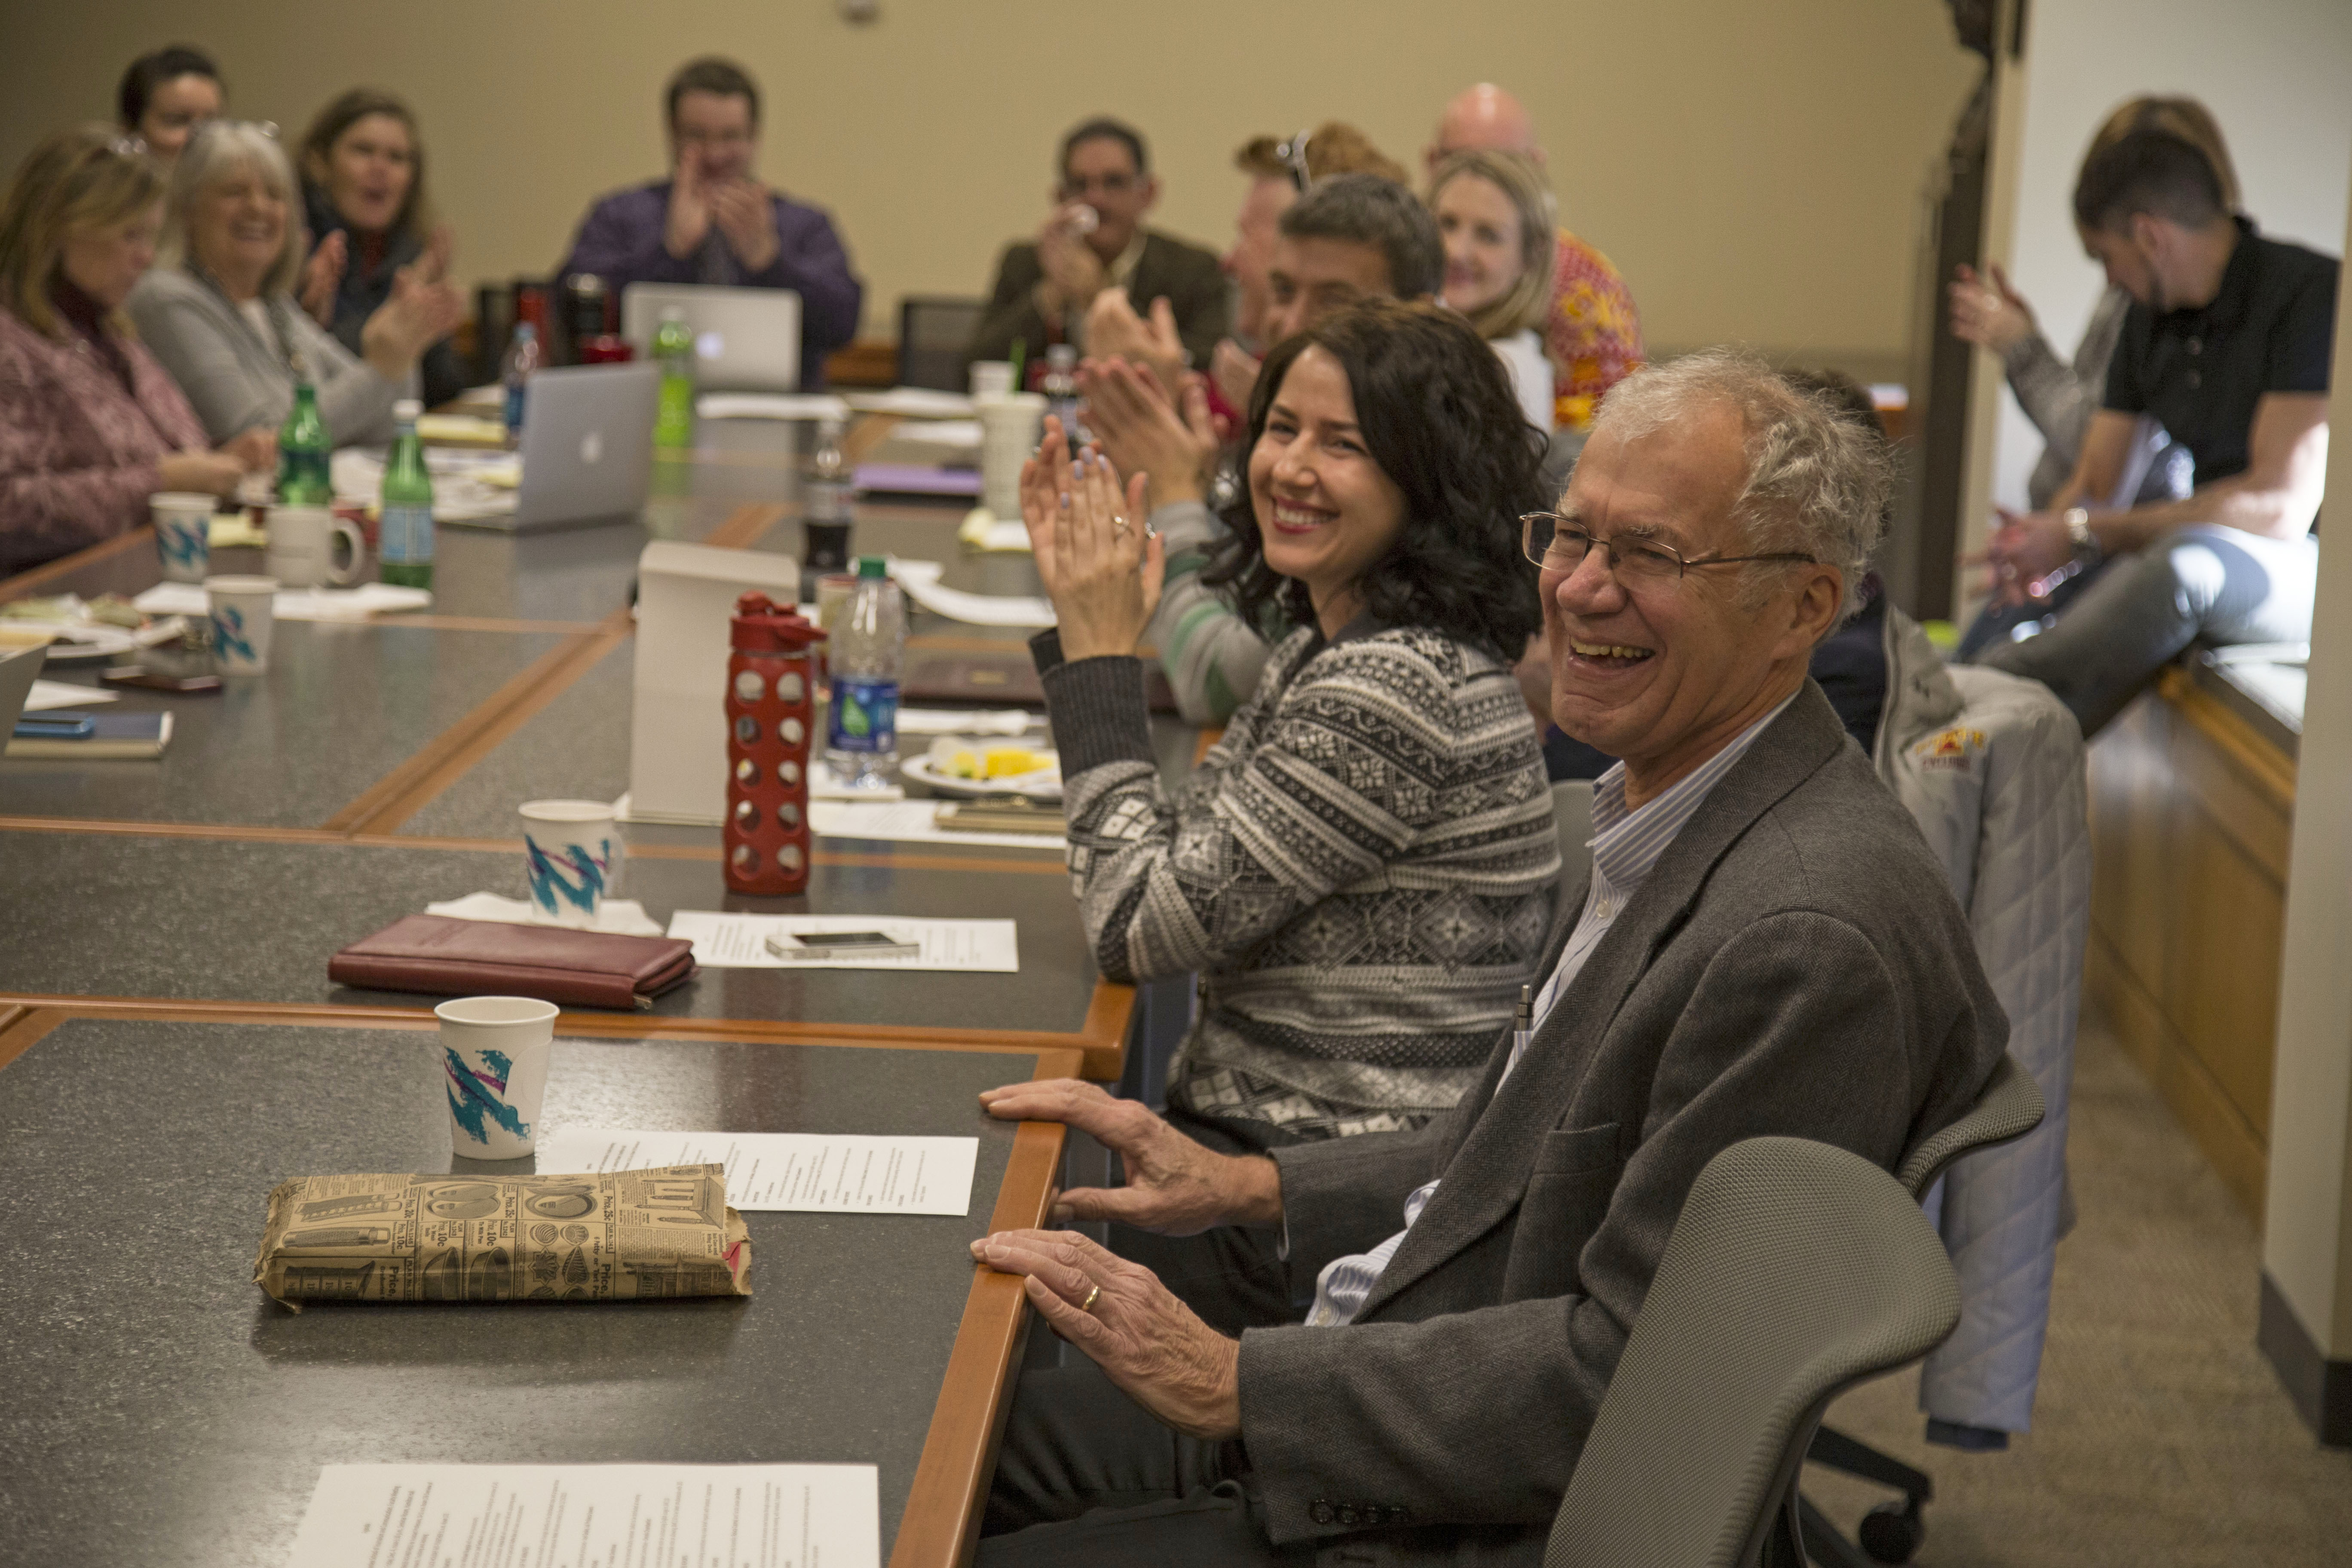 Greenlee faculty celebrated Abbott’s retirement at the final faculty meeting of the fall 2015 semester. Photo by Matt Wettengel